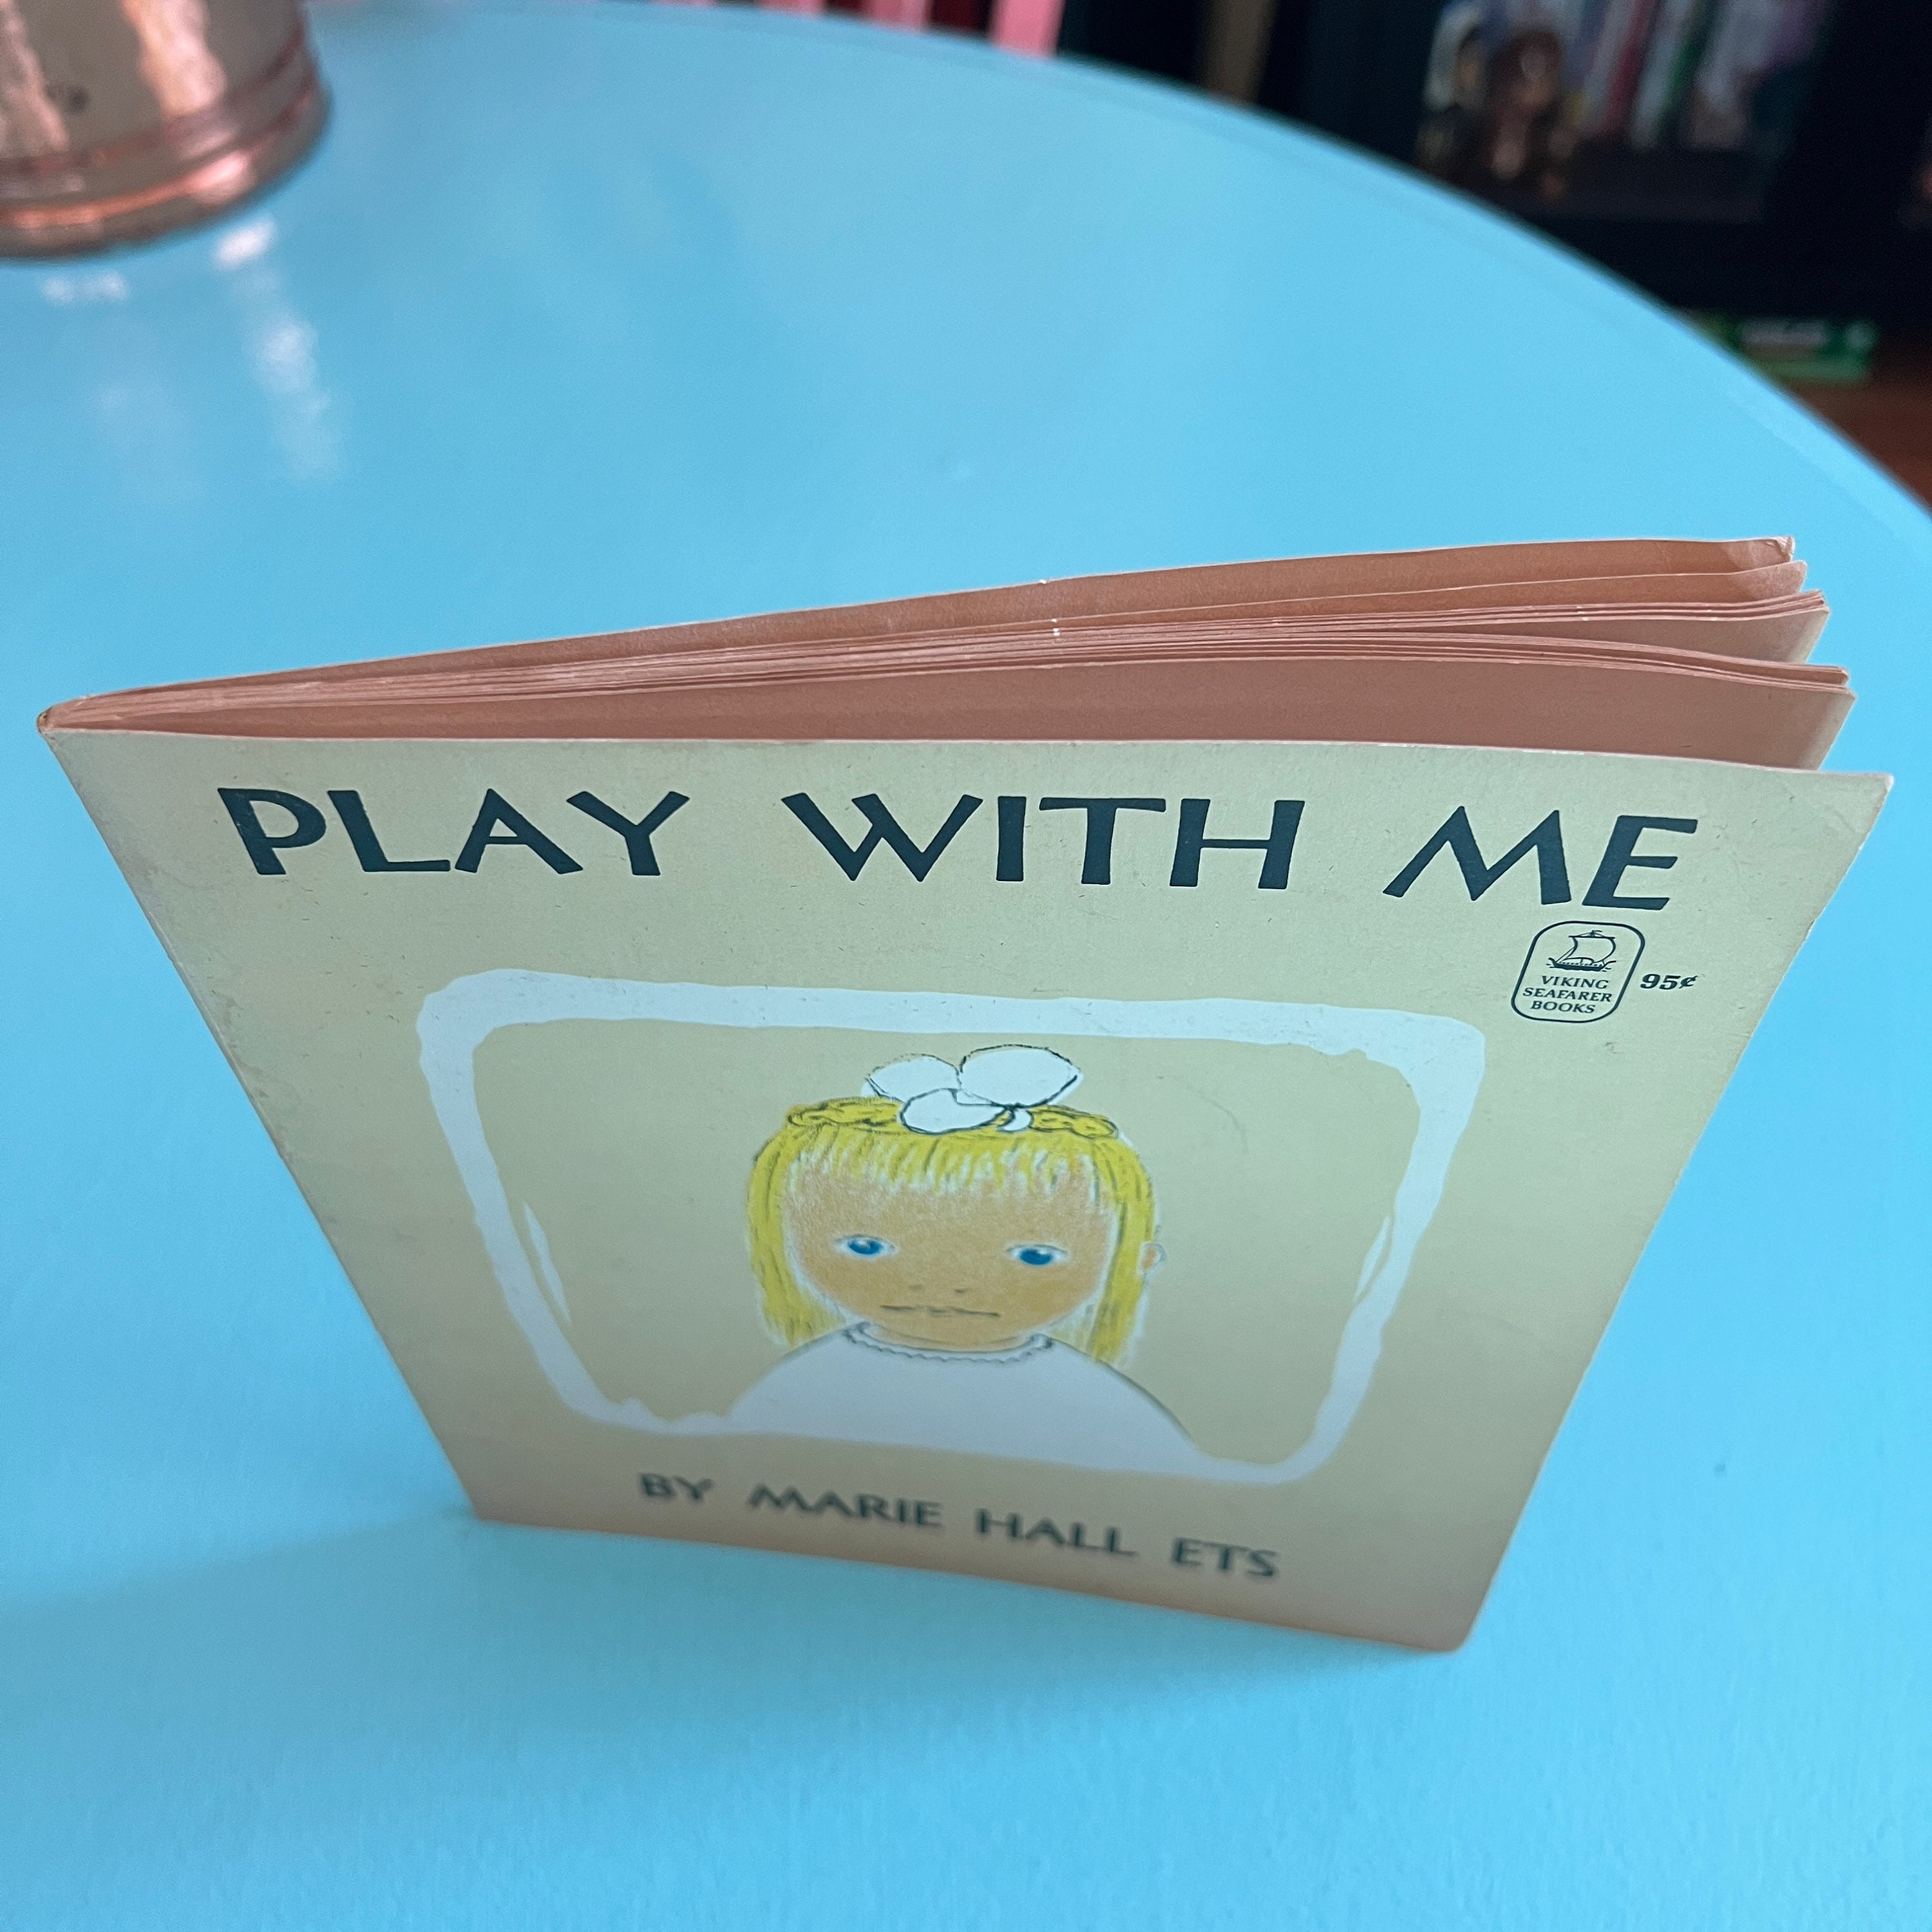 Play with Me by Marie Hall Ets: 9780140501780 | :  Books